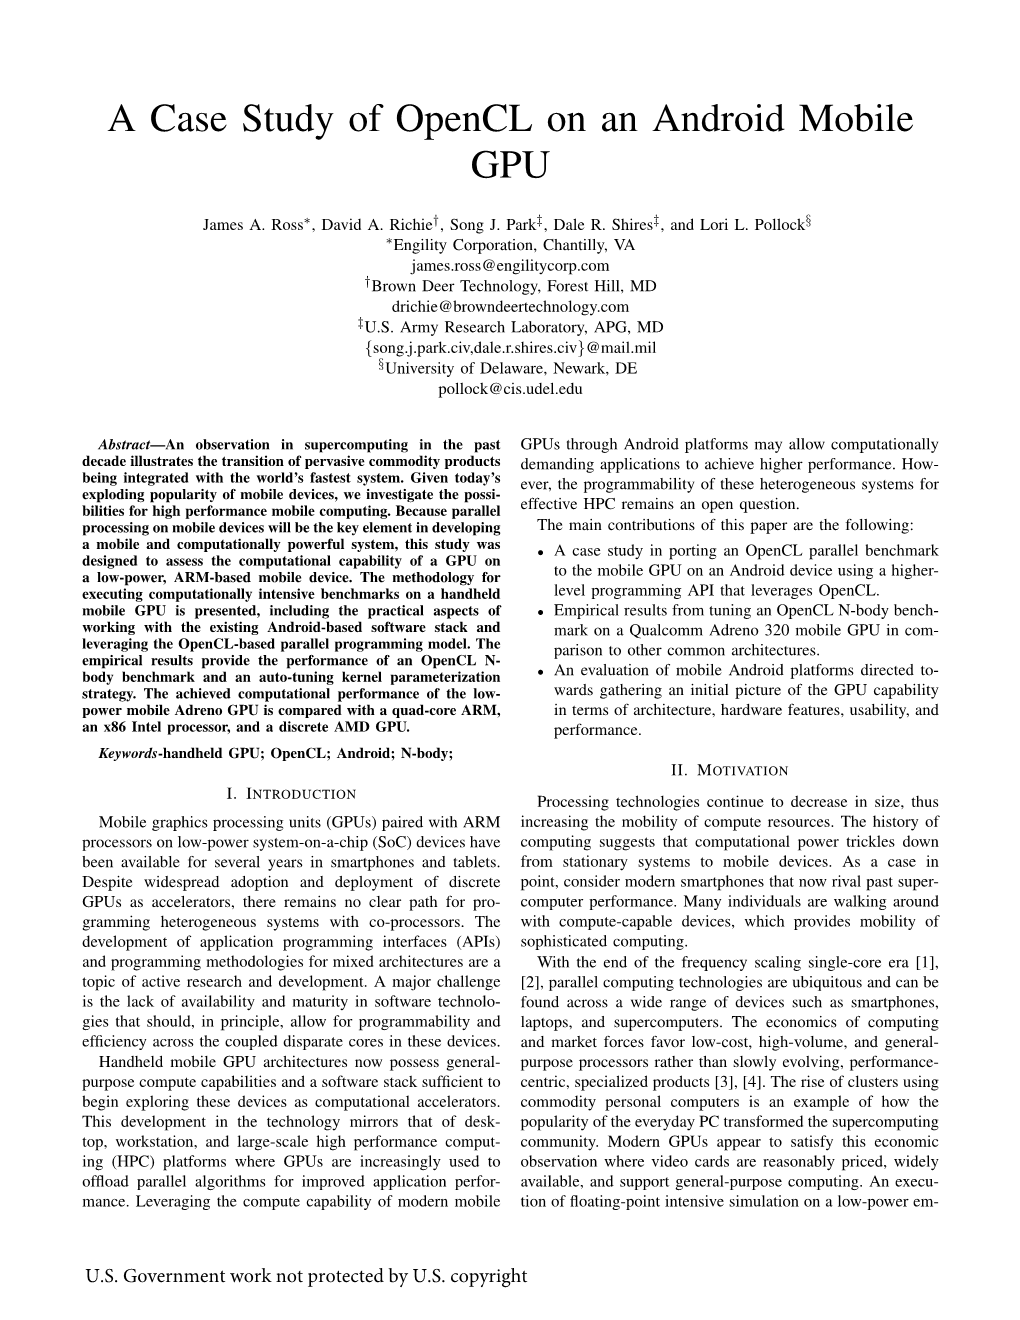 A Case Study of Opencl on an Android Mobile GPU